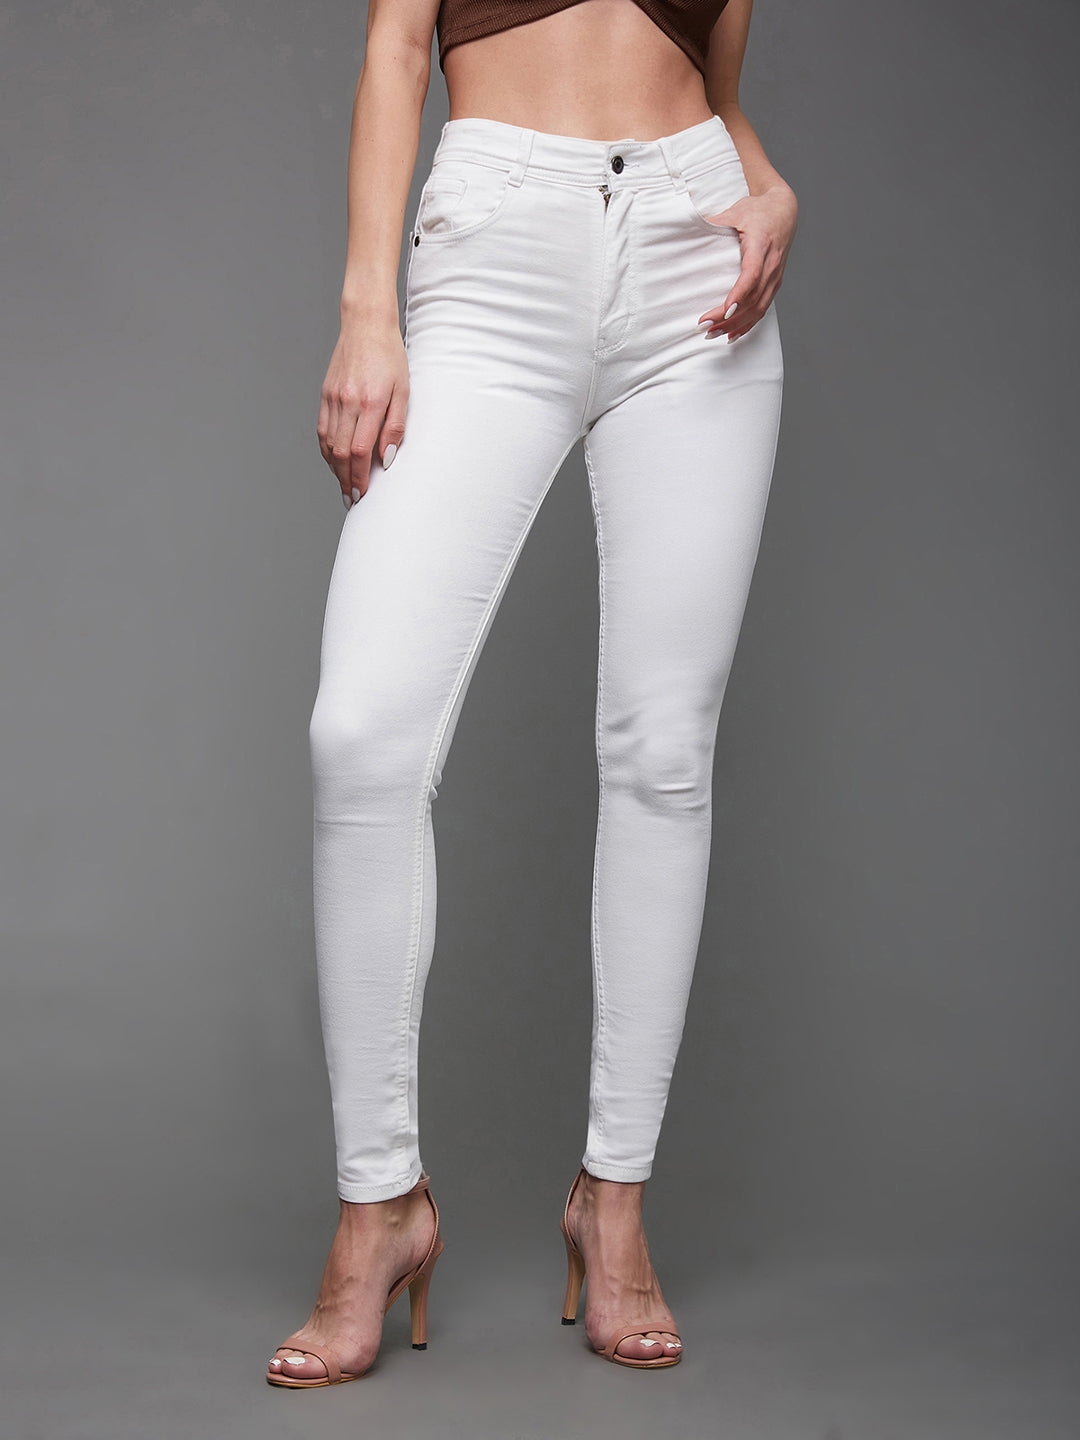 White Skinny High Rise Clean Look Bleached Regular Length Stretchable Denim Jeans